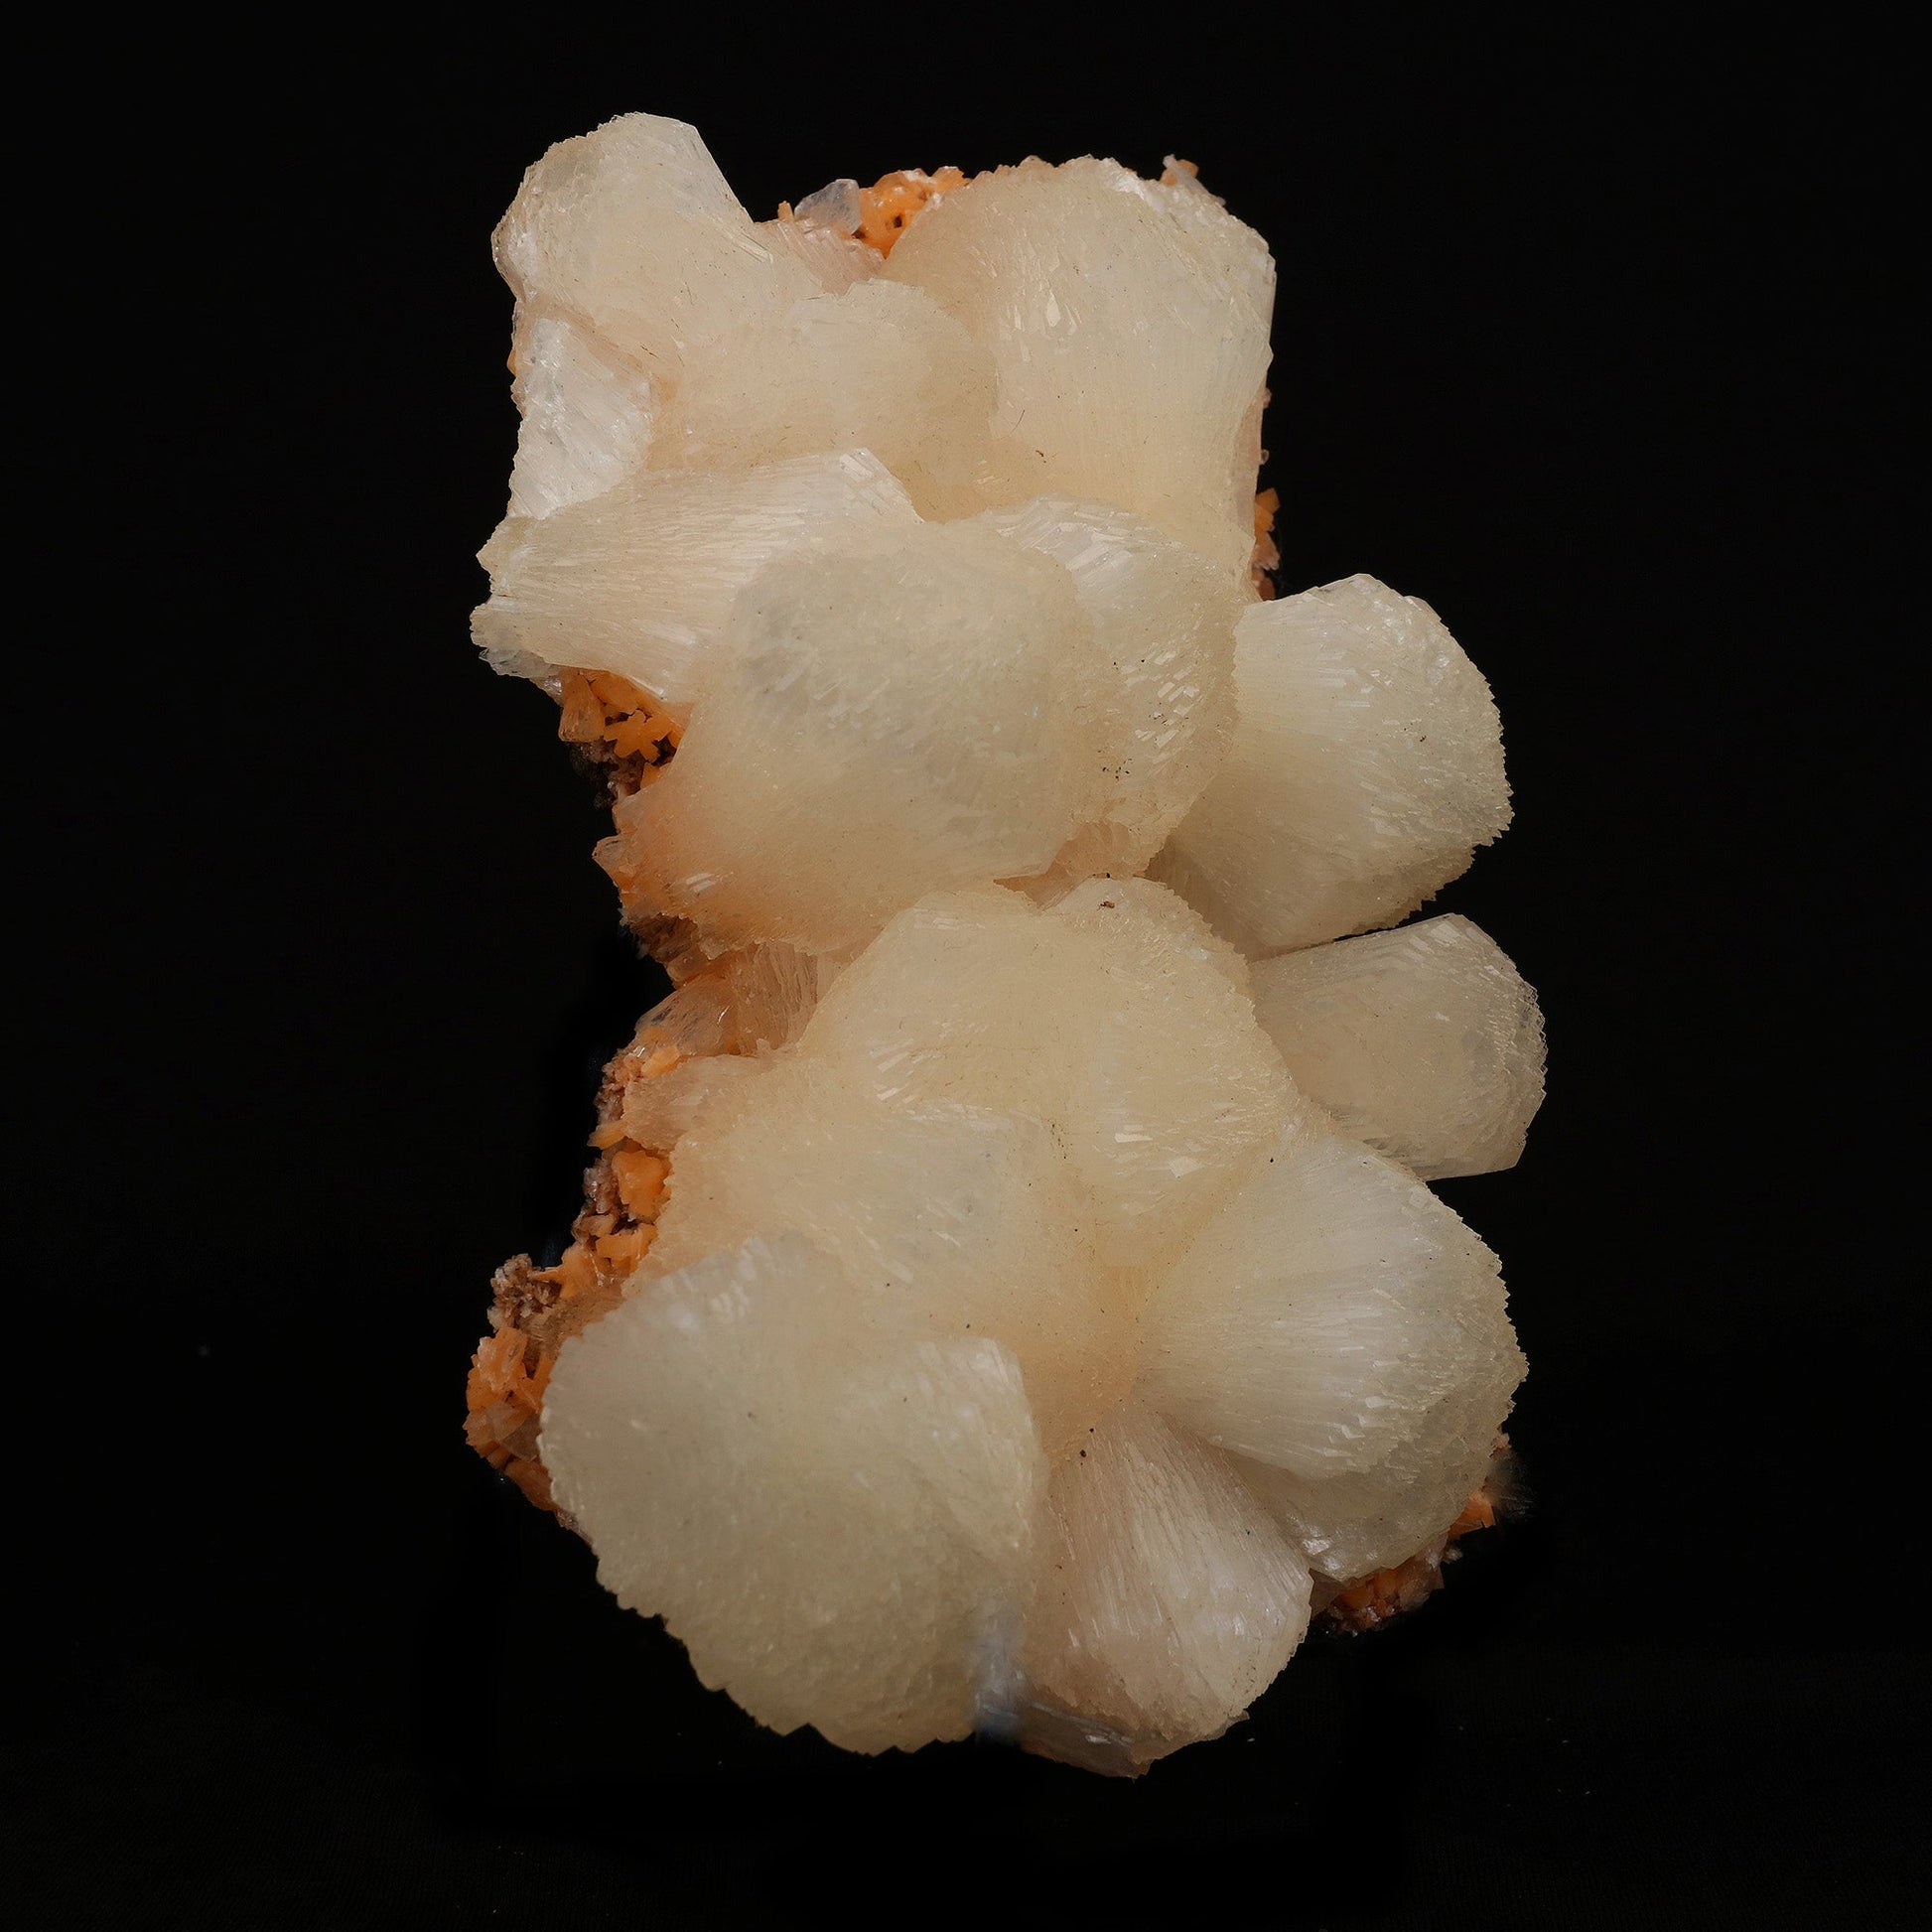 Stilbite Lusterous Cluster Natural Mineral Specimen # B 5204  https://www.superbminerals.us/products/stilbite-lusterous-cluster-natural-mineral-specimen-b-5204  Features: Featuring many excellent quality bladed groups of Stilbite in a soft white hue, resting over pearly stalactitic formations of peach colored Heulandite, this piece is a stunning example of the material. The sculpture is really flashy and three-dimensional, and I particularly like how the Stilbites